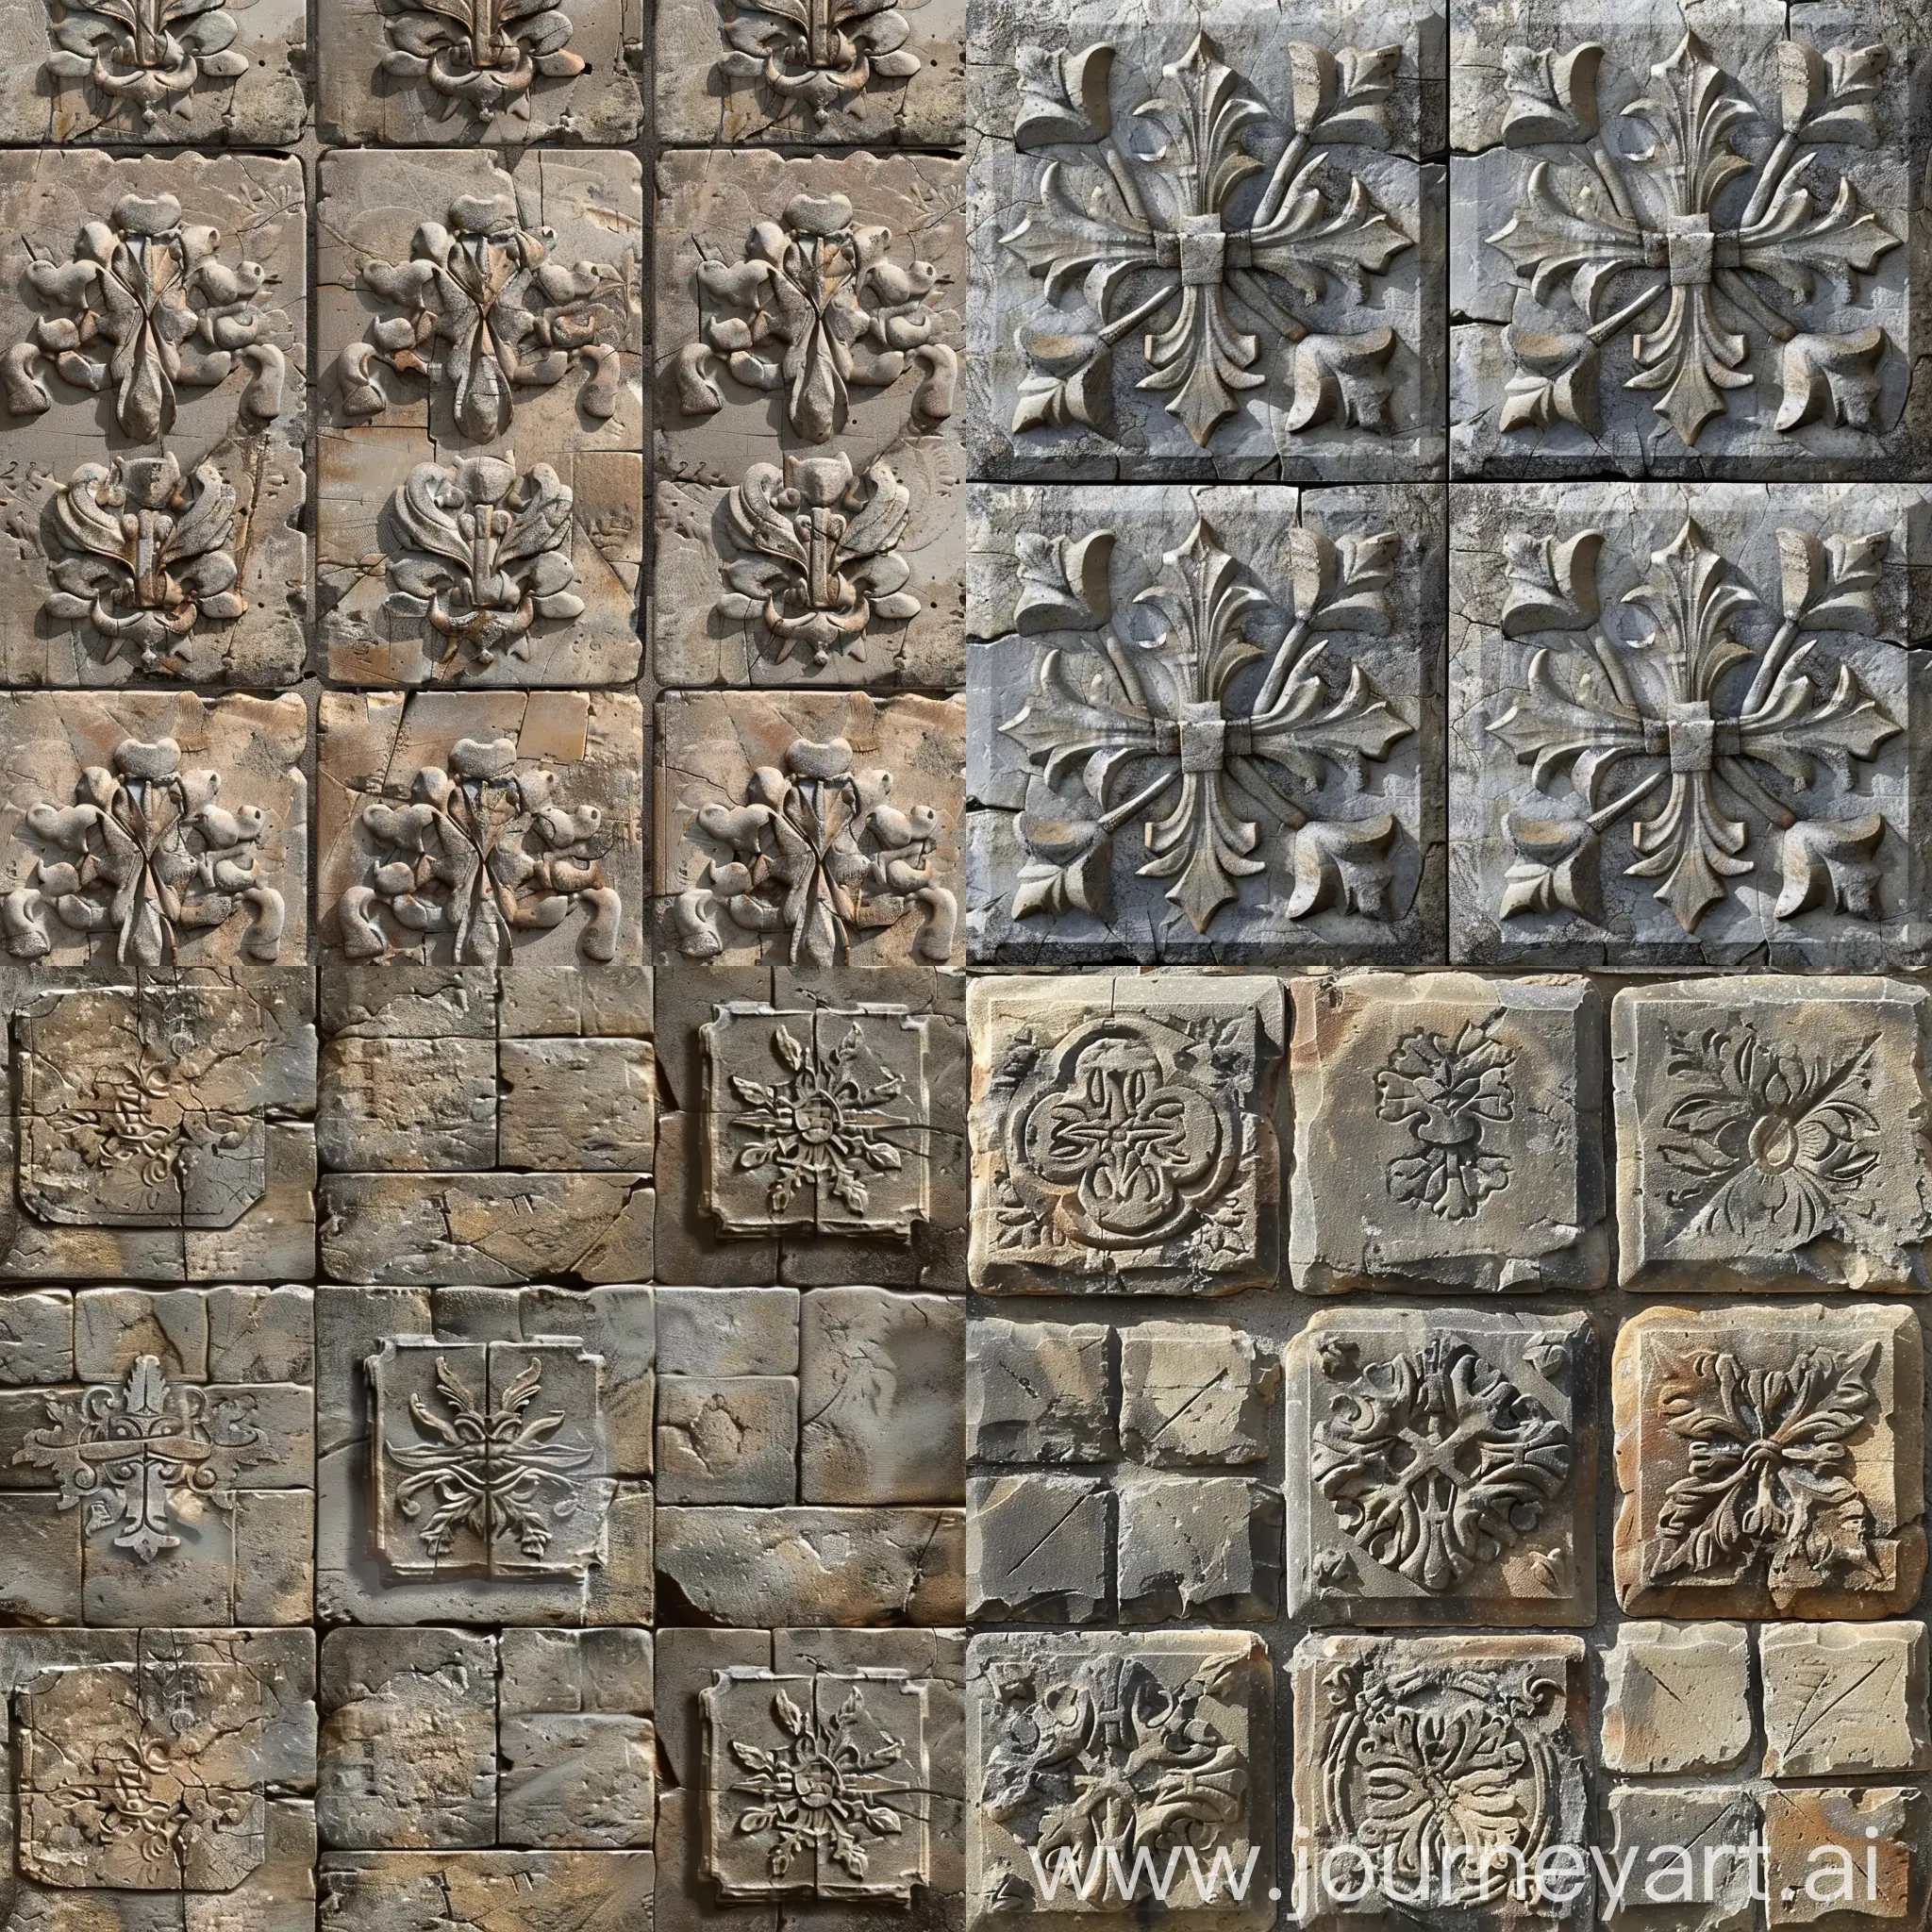 Medieval-Stone-Texture-with-Heraldic-Engravings